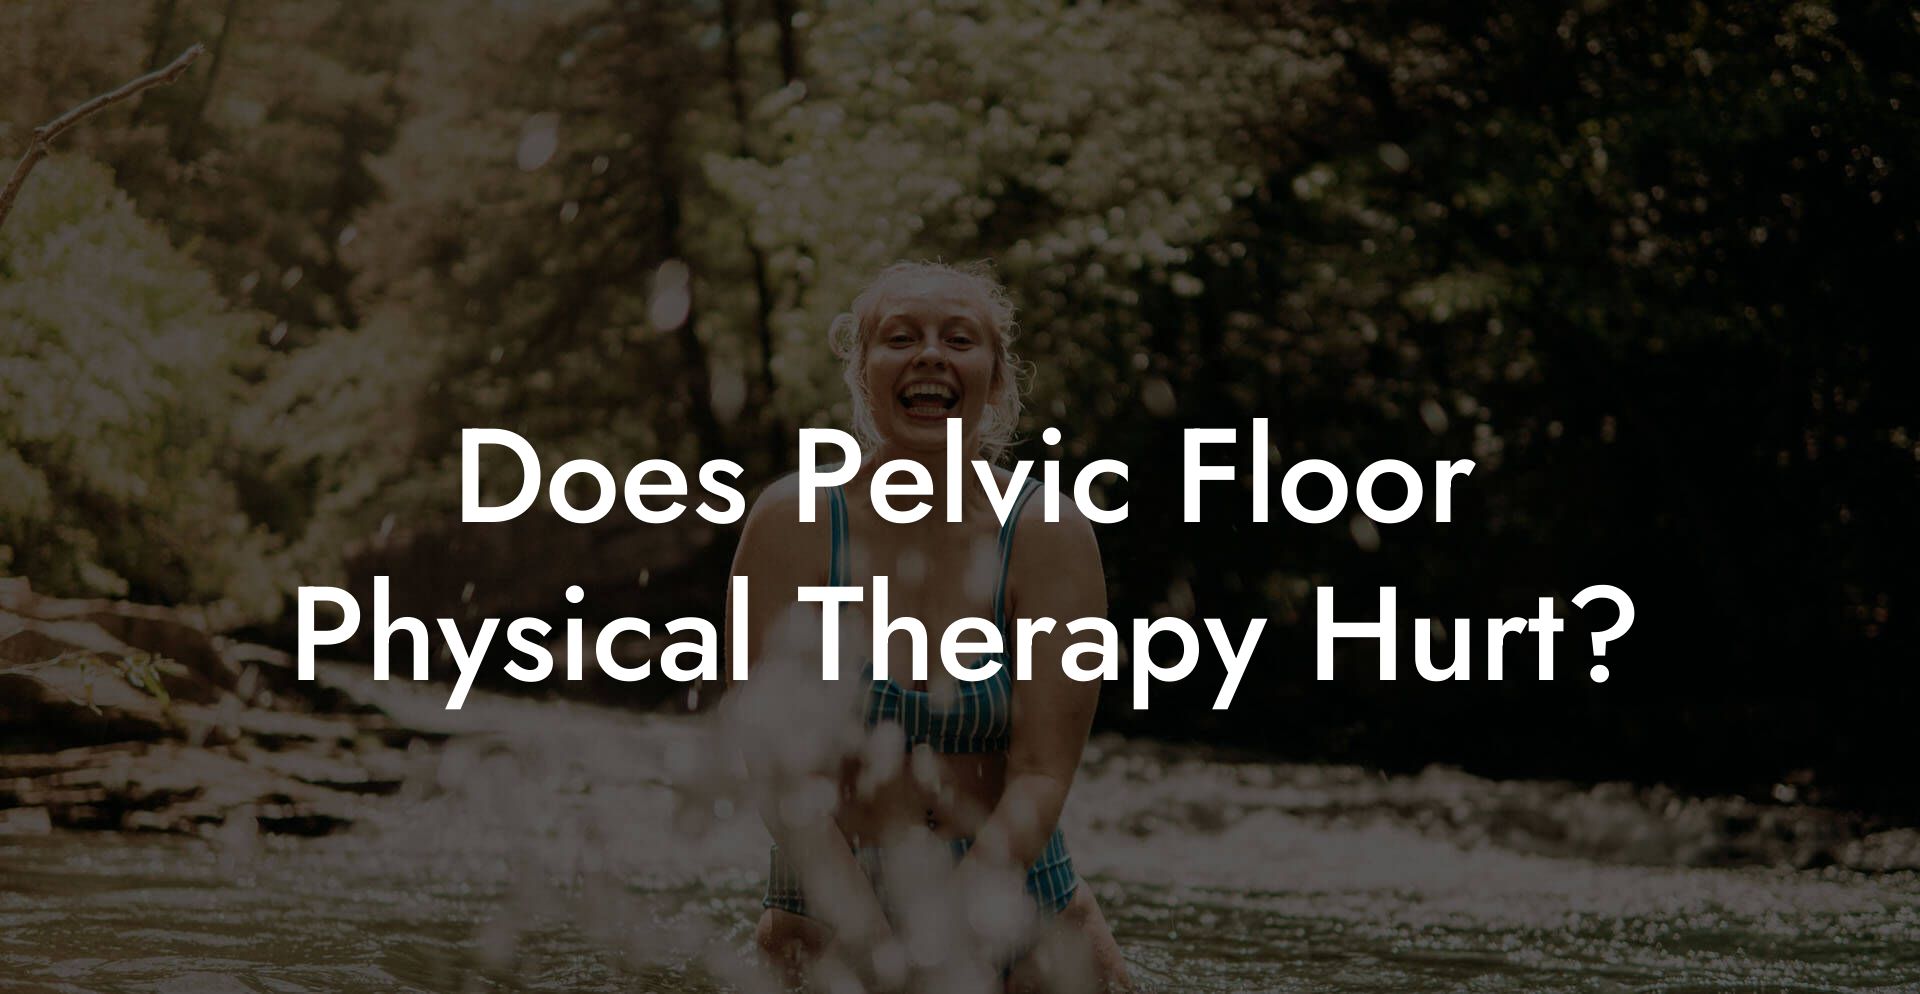 Does Pelvic Floor Physical Therapy Hurt?